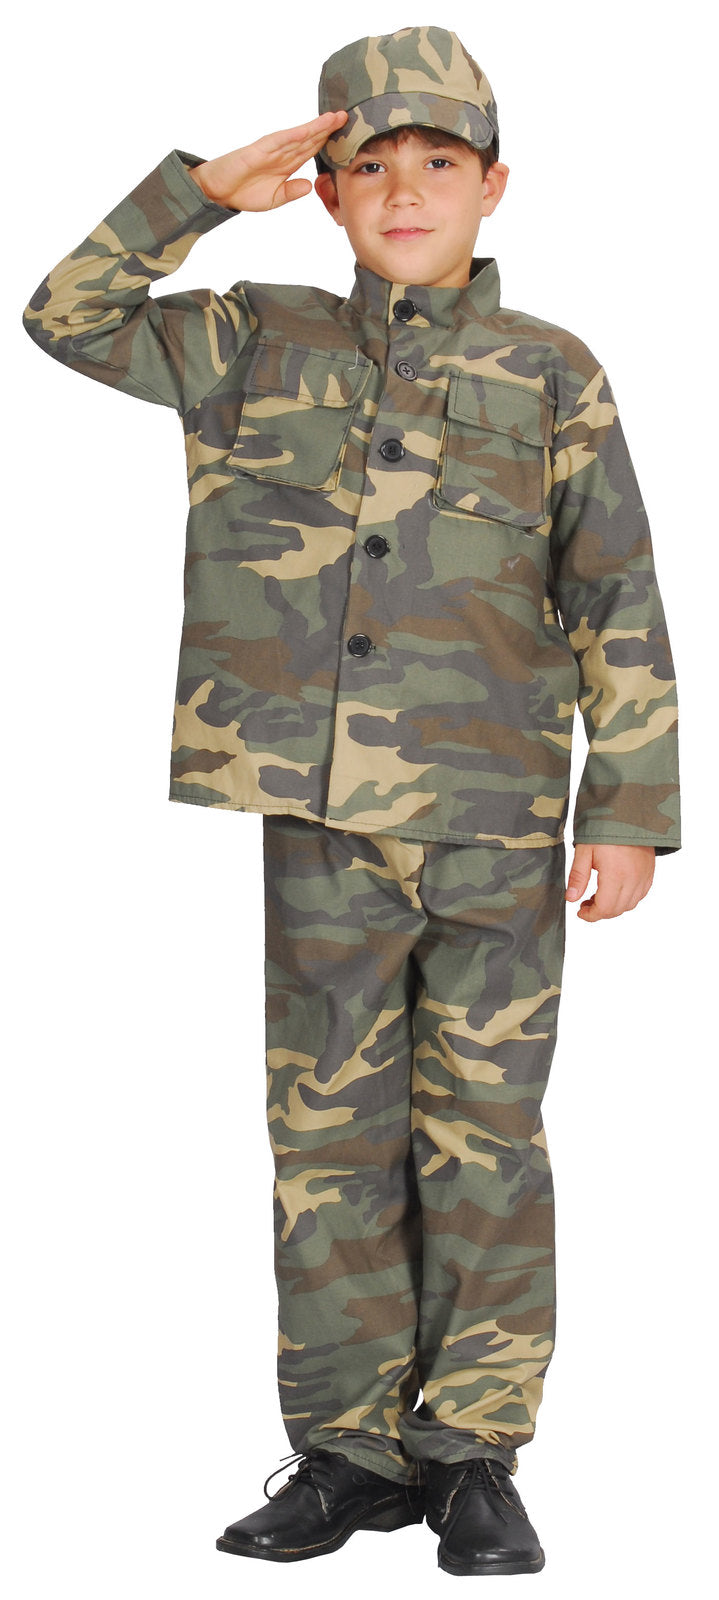 Army Soldier Camo Boys or Girls Costume complete with Top, Pants, Hat